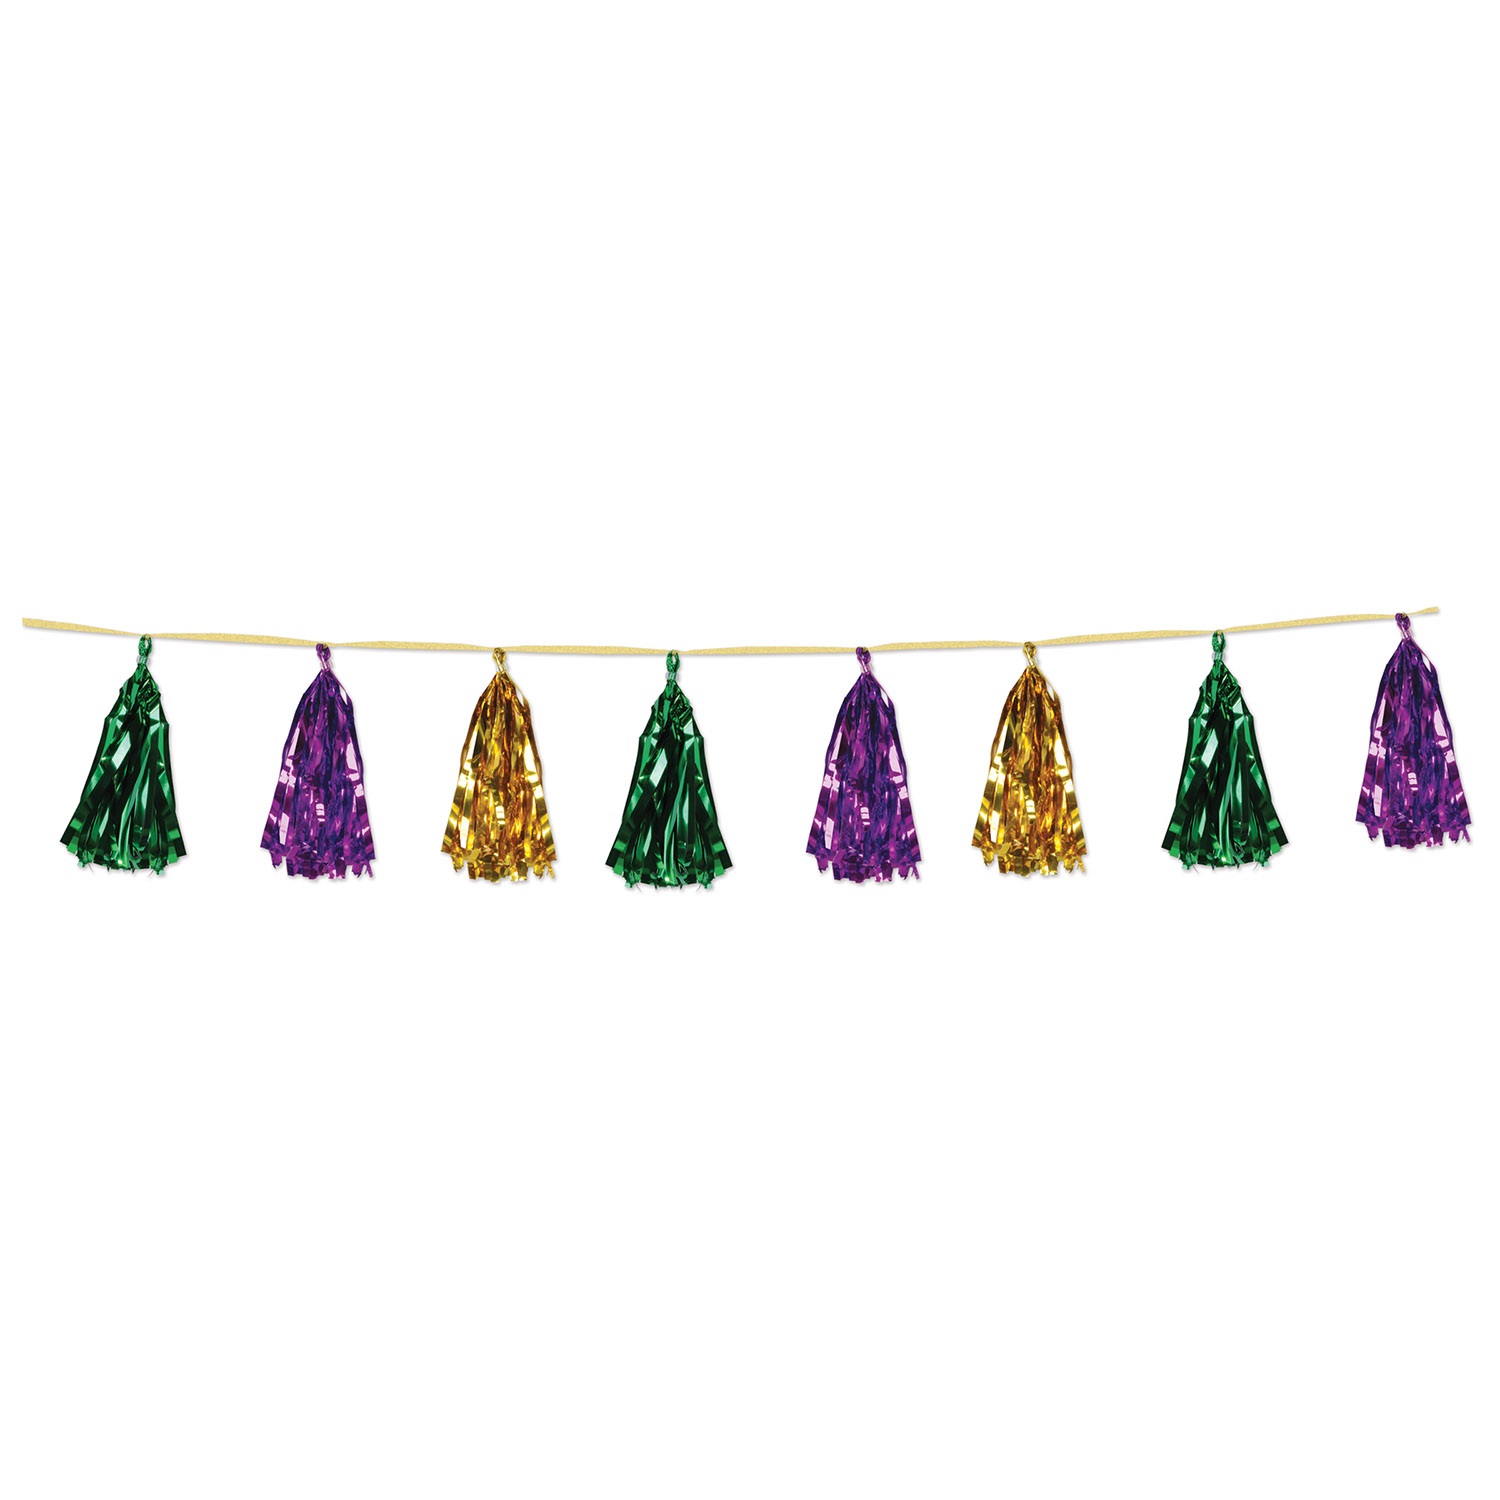 Beistle Club Pack of 12 Decorative Holiday Gold, Green and Purple Metallic Tassel Garland 8’